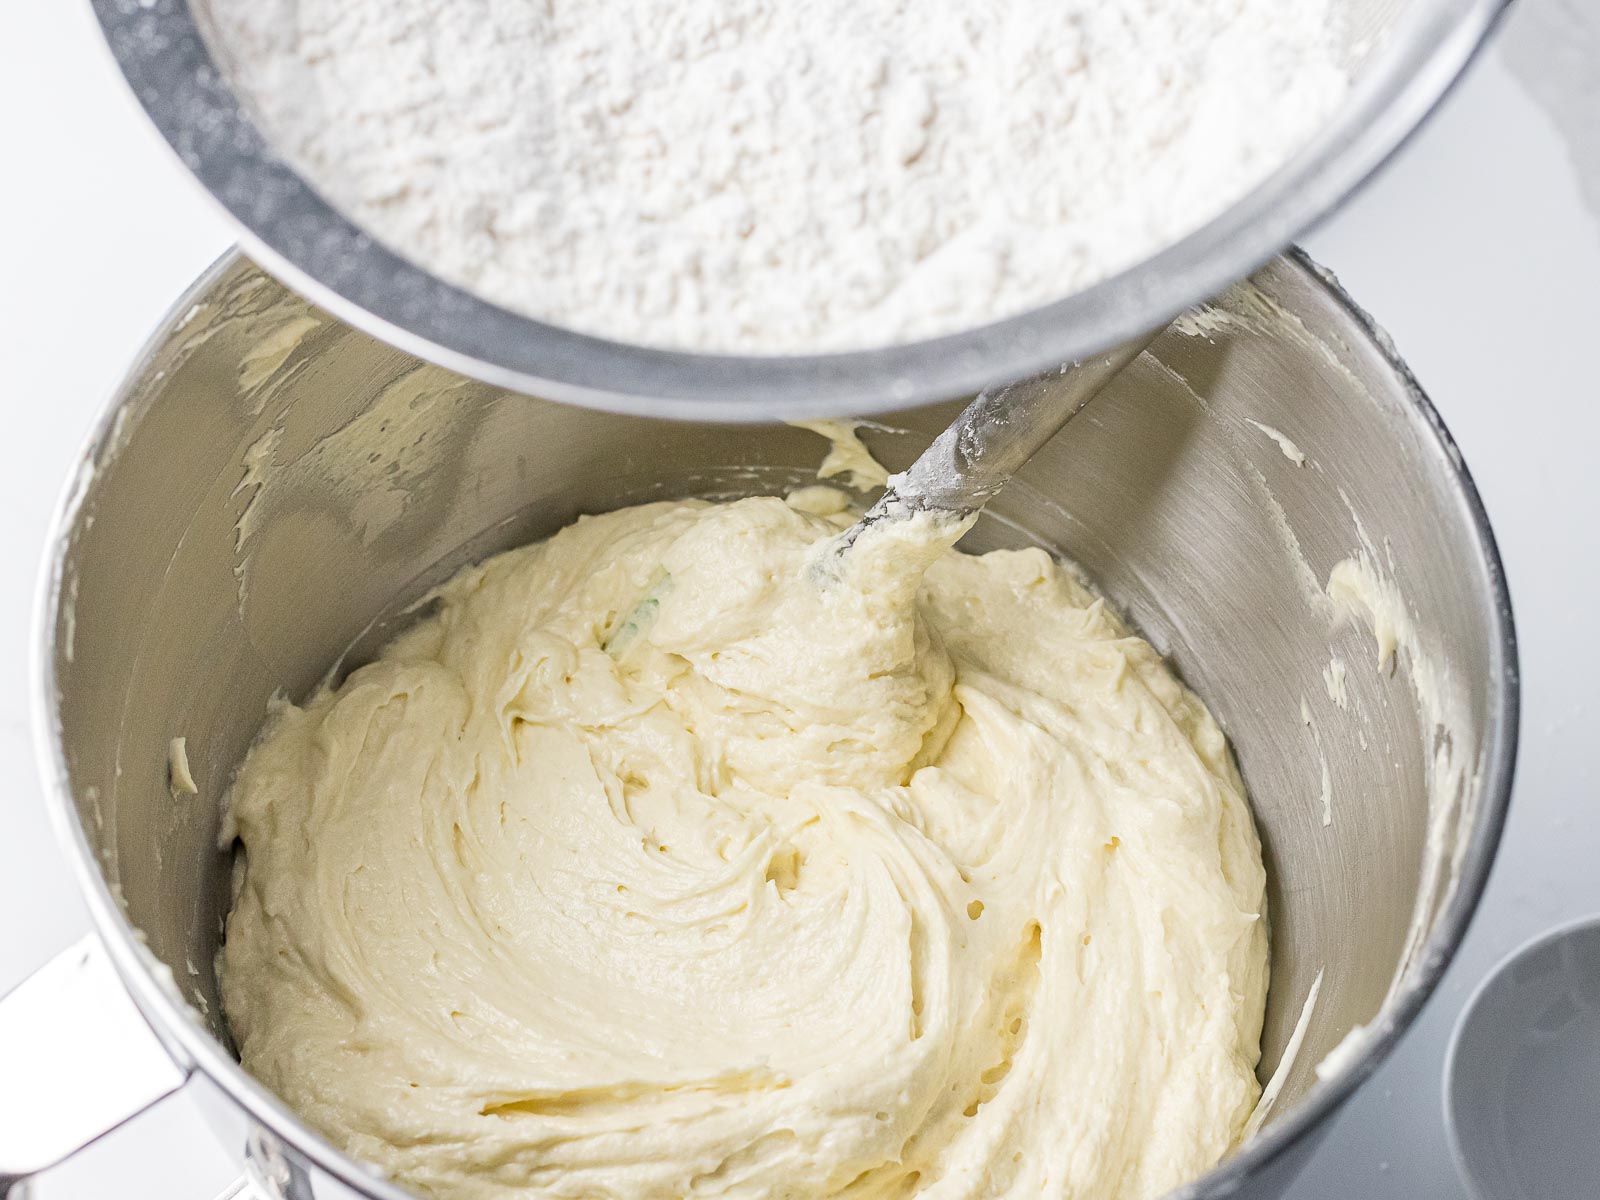 pound cake batter in a metal bowl with flour being added from a sifter